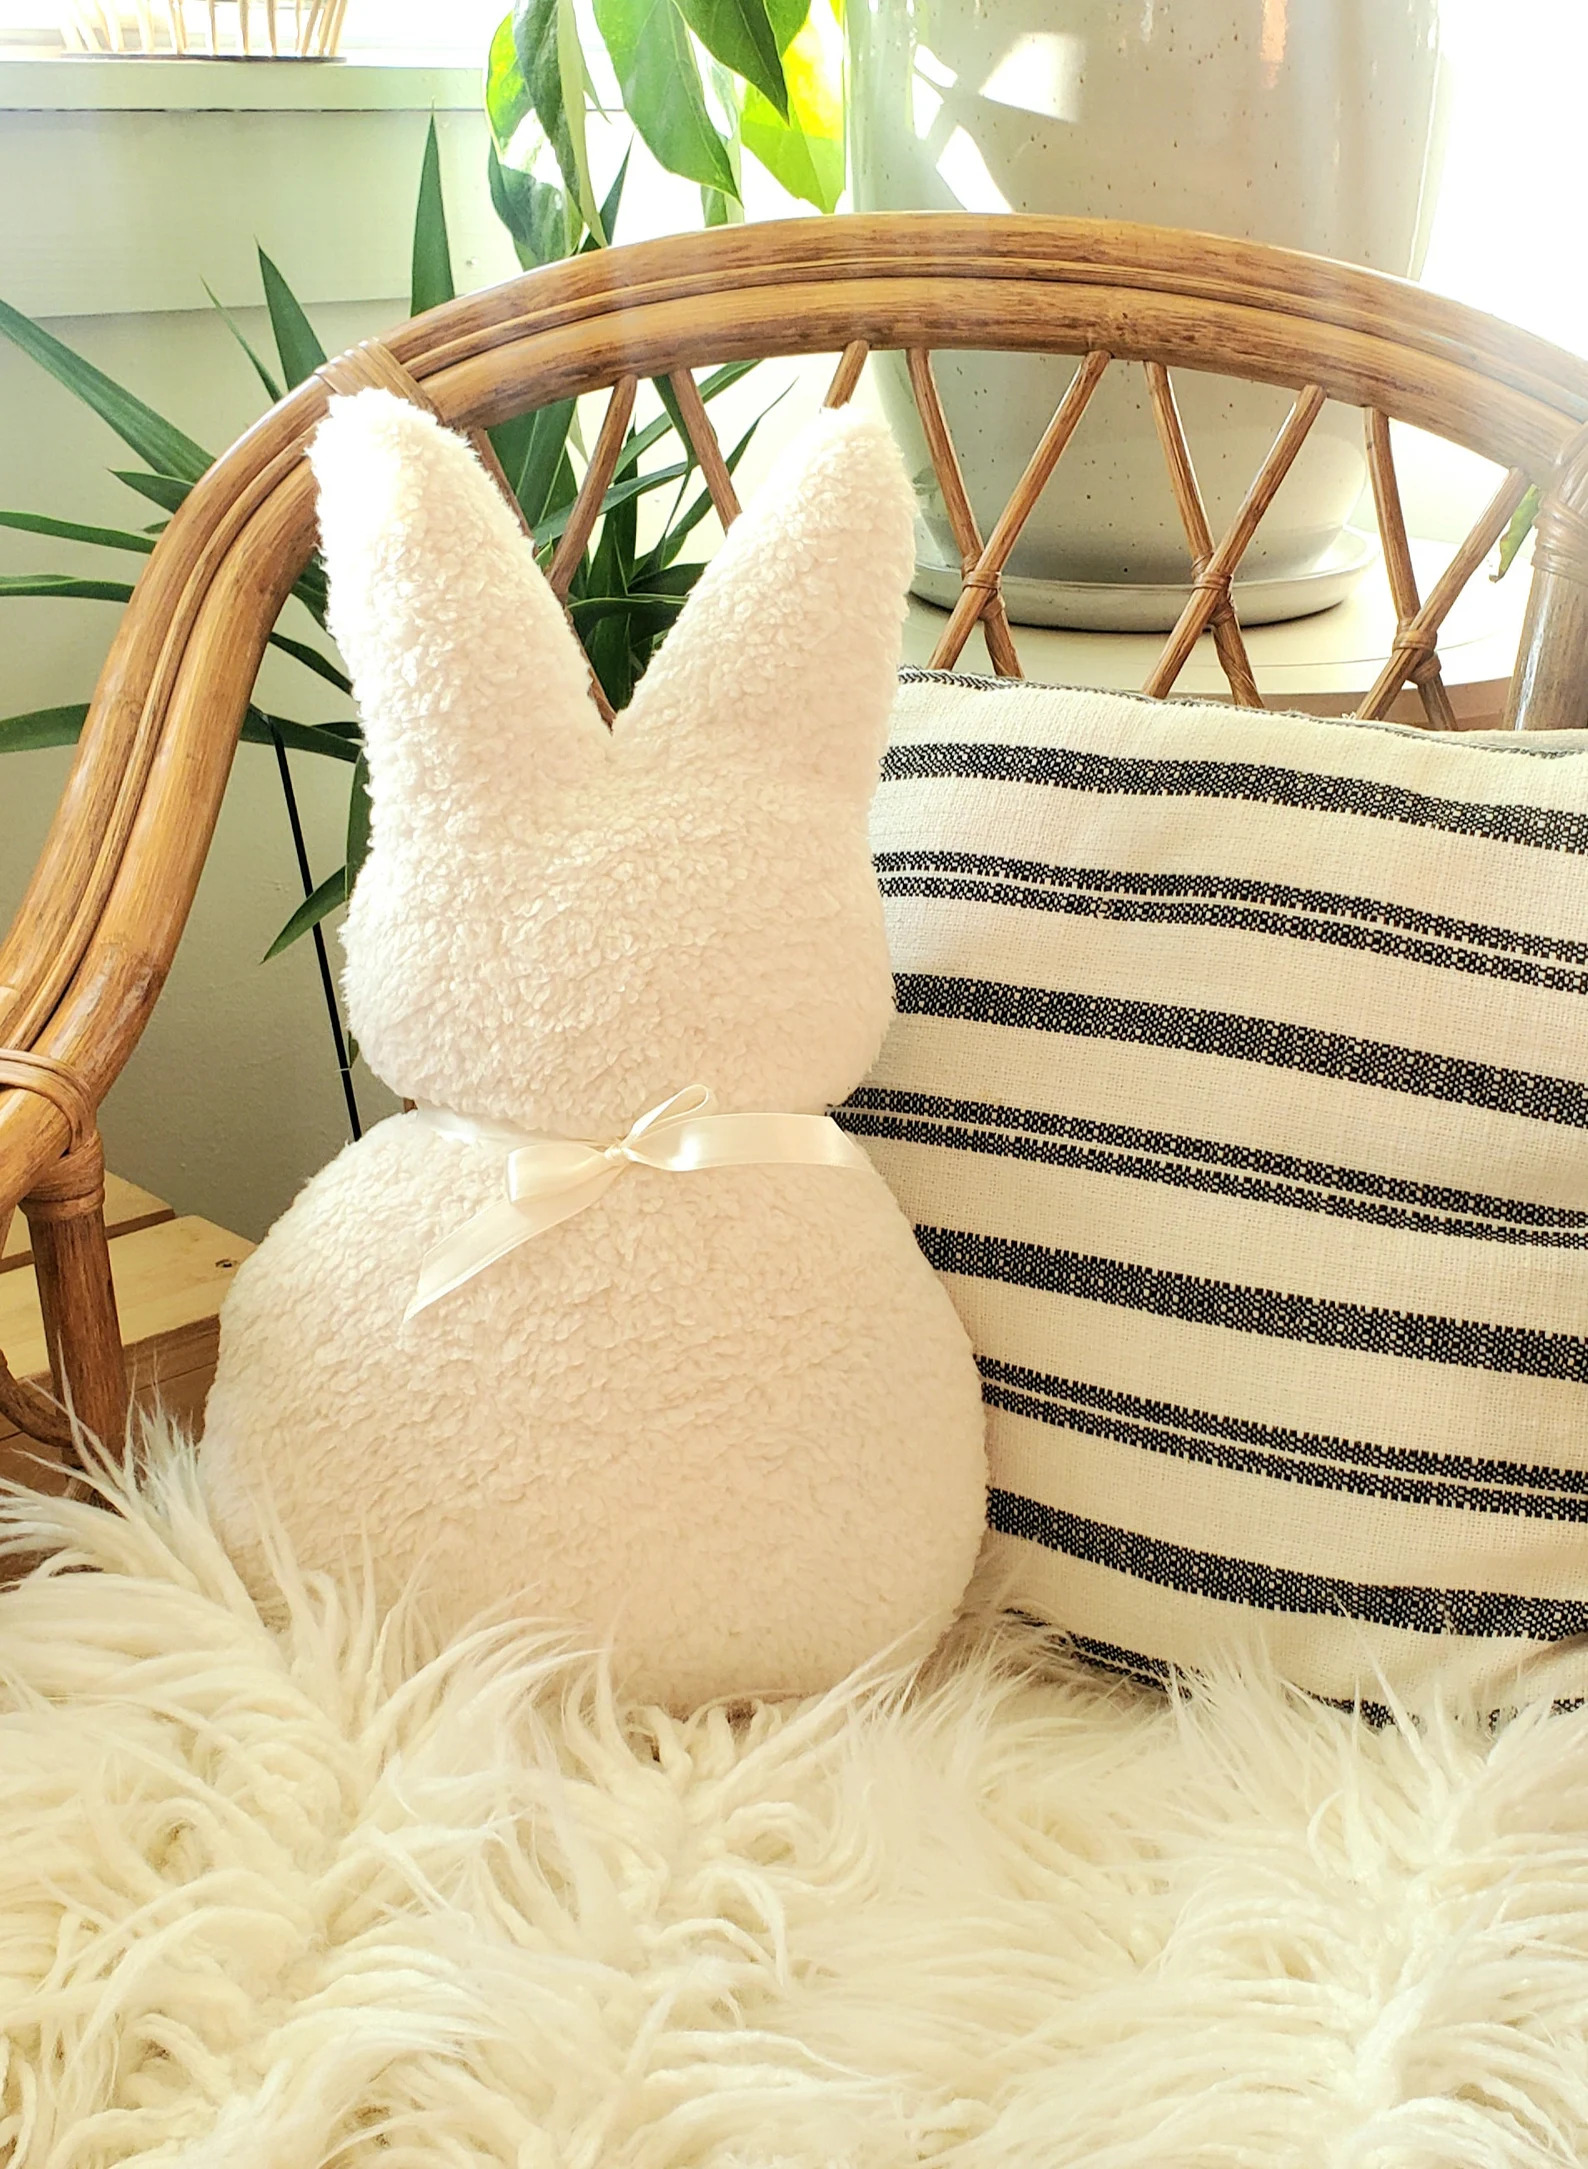 15 Egg-cellent Easter Pillow Designs to Welcome the Festive Season